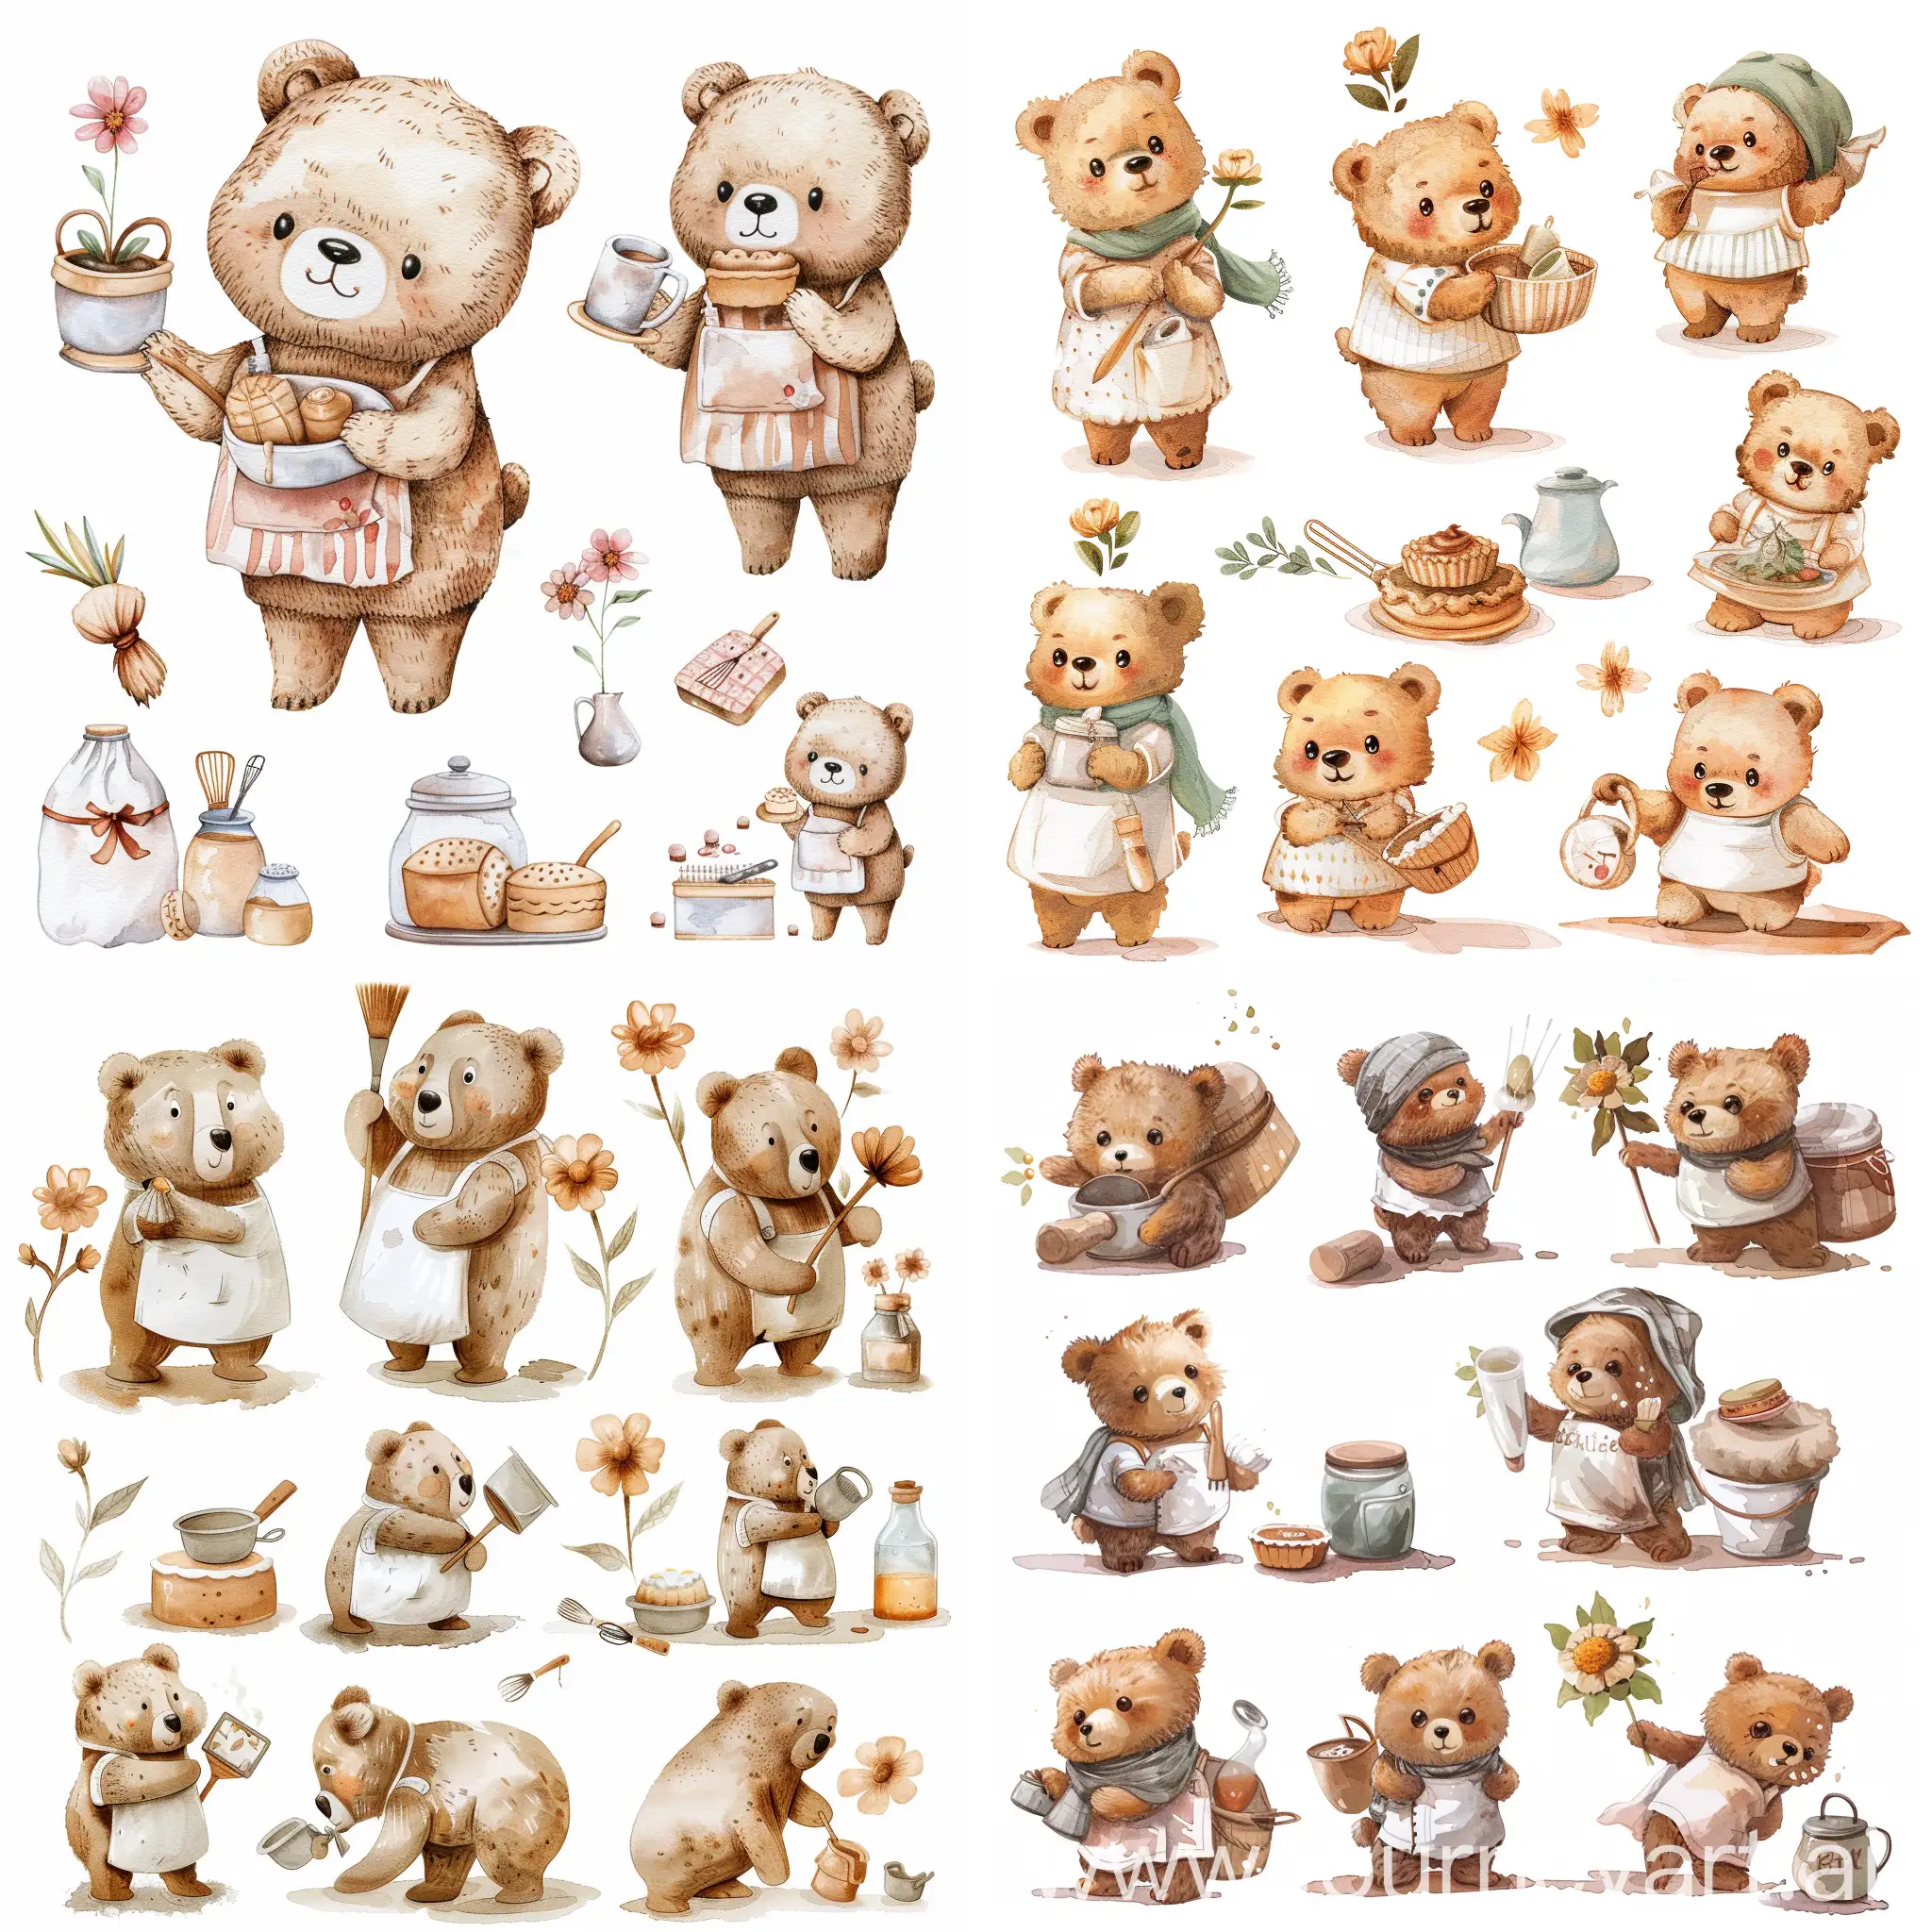 Adorable-Bear-Character-with-Baking-Supplies-Whimsical-Childrens-Illustration